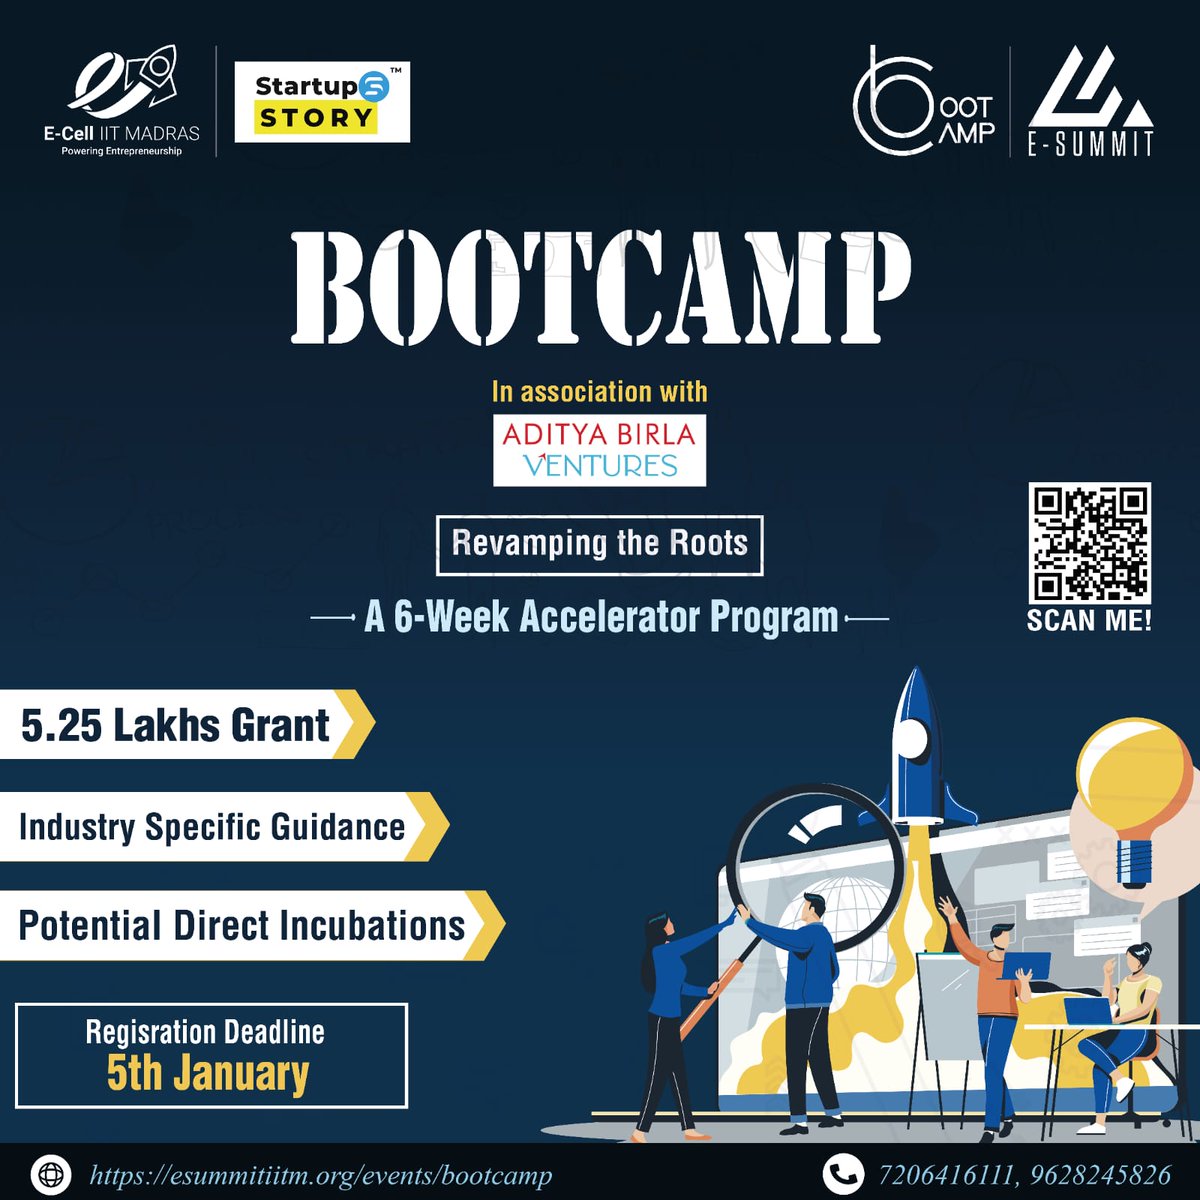 🚀 Exciting News for Early-Stage Startups! Join us for Startup BootCamp, presented by E-Cell IIT Madras – Your gateway from level 0 to 1. 🌐✨

Calling all early-stage startups to register here: esummitiitm.org/events/bootcamp

#StartupBootCamp #ECellIITMadras  #StartupAccelerator